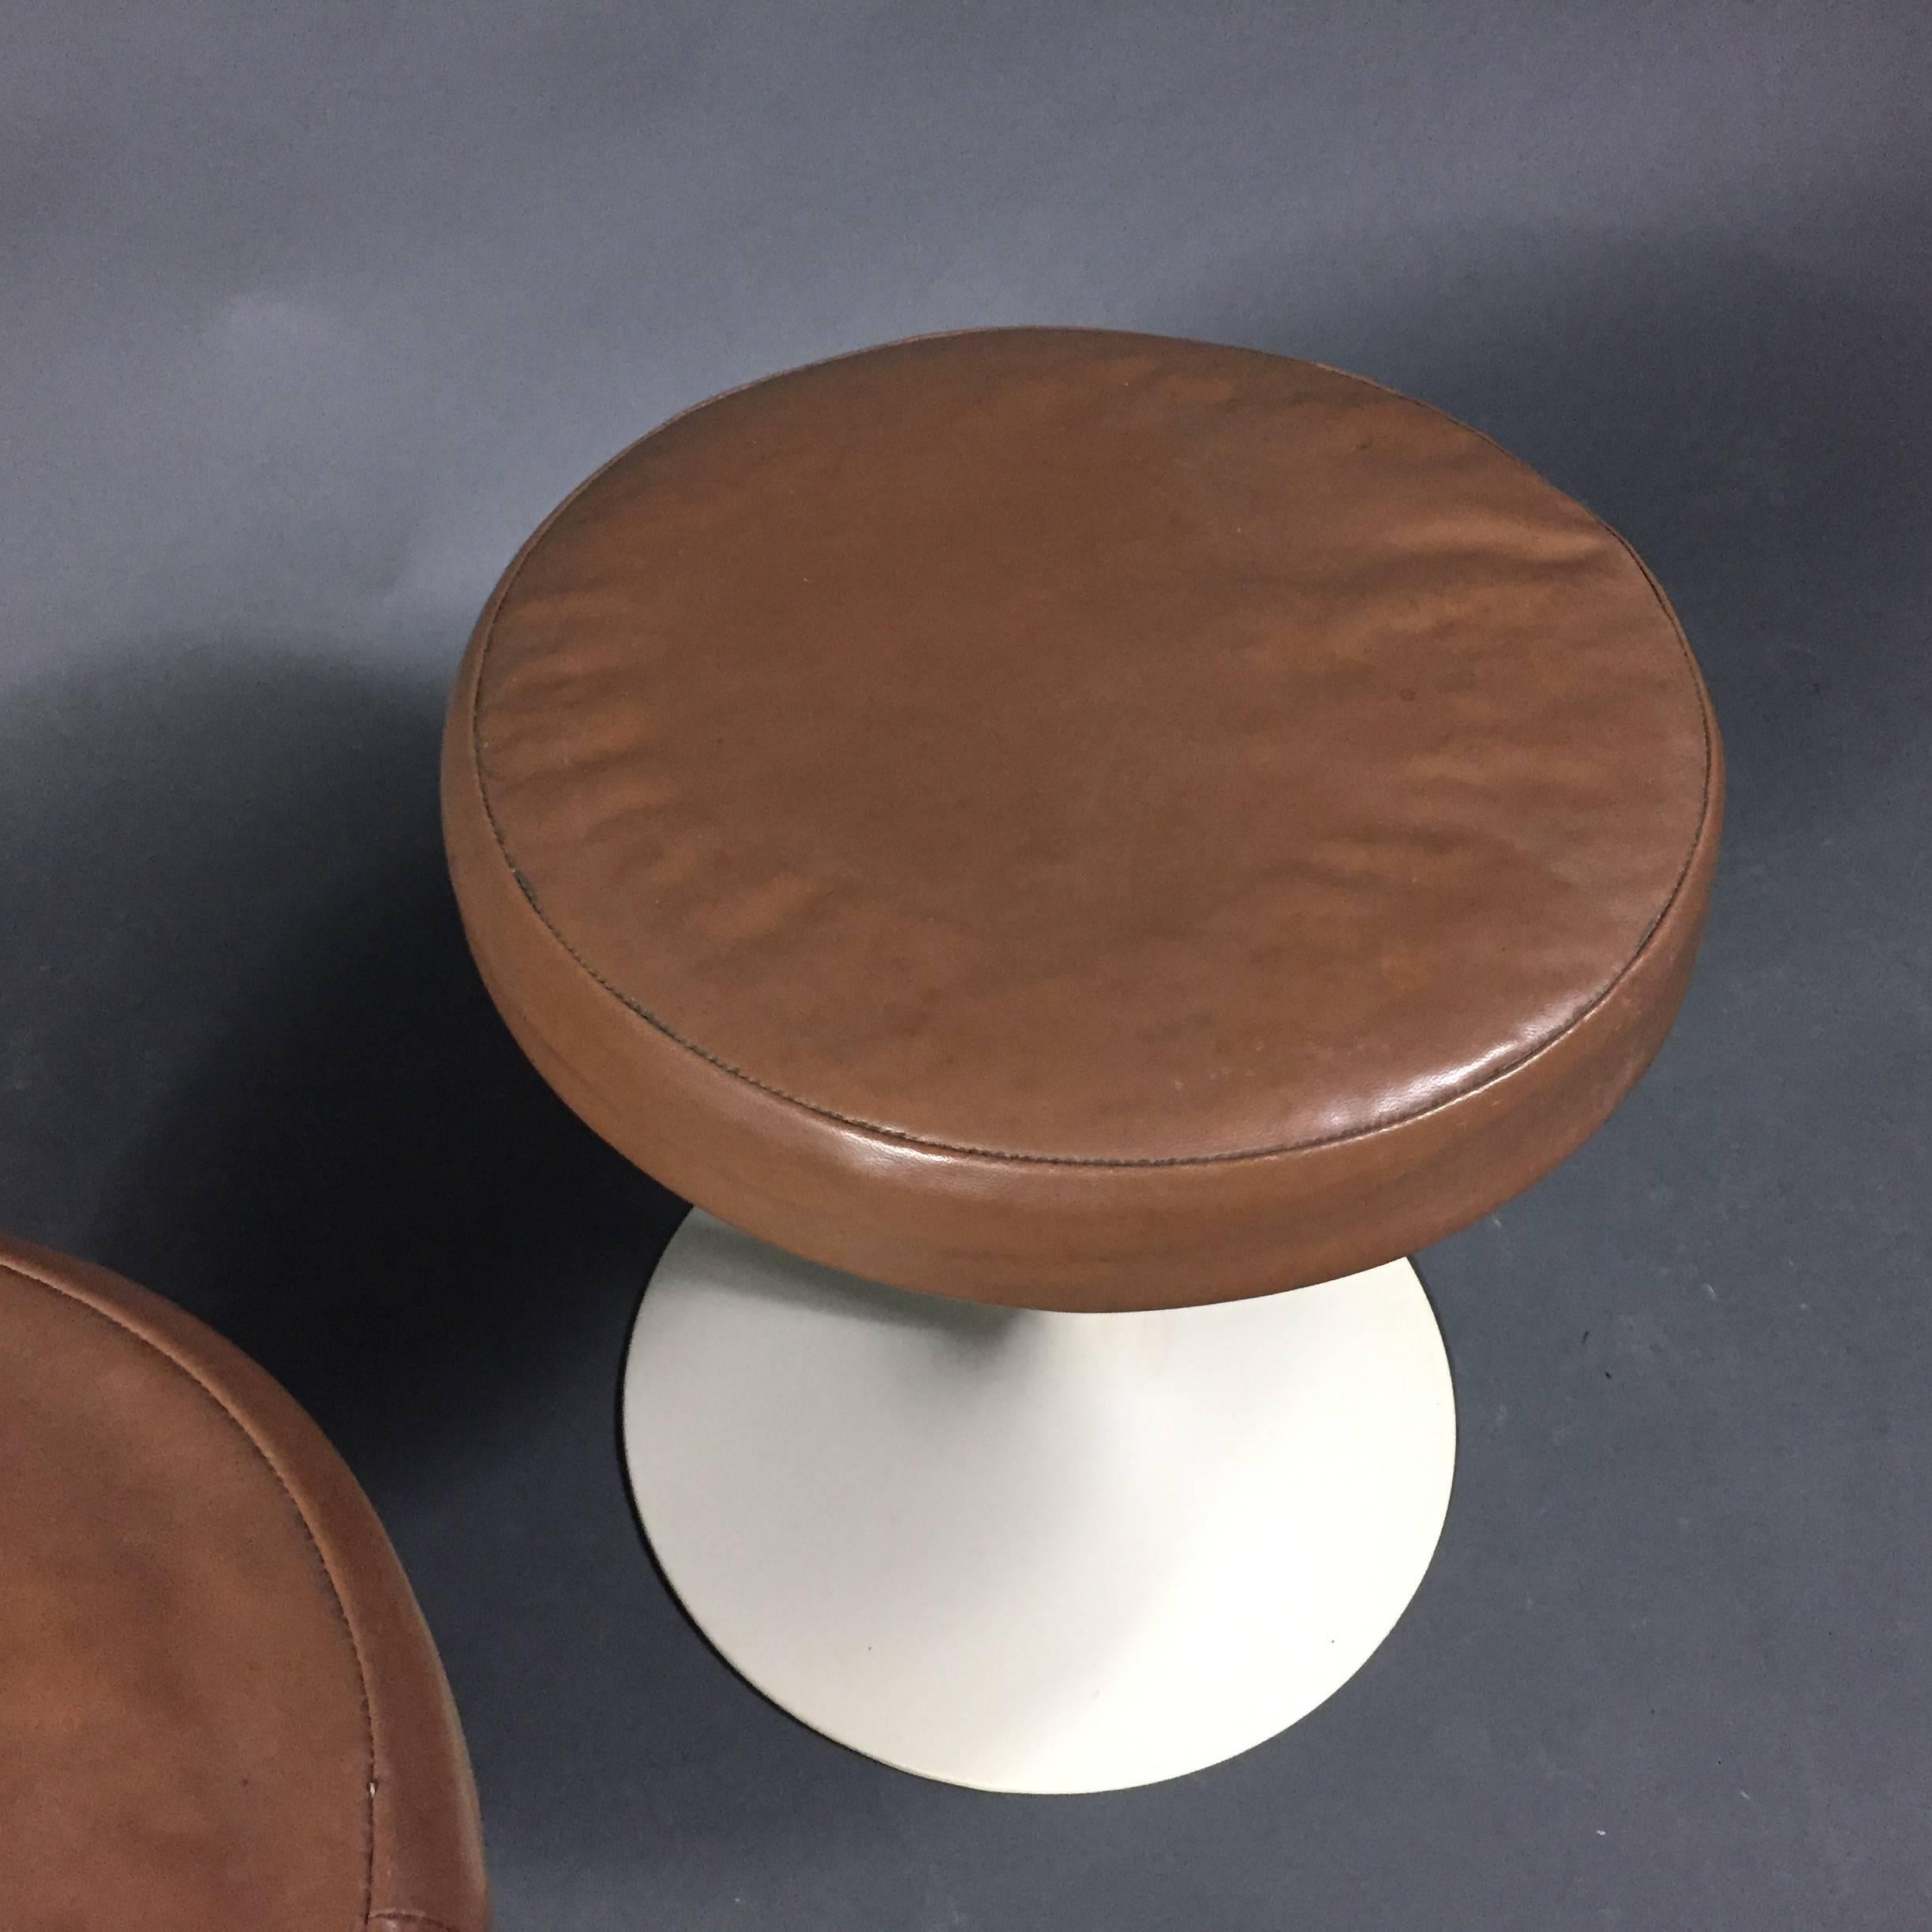 Pair of Eero Saarinen Tulip Stool, Original Leather, Knoll, 1950s In Good Condition For Sale In Hudson, NY